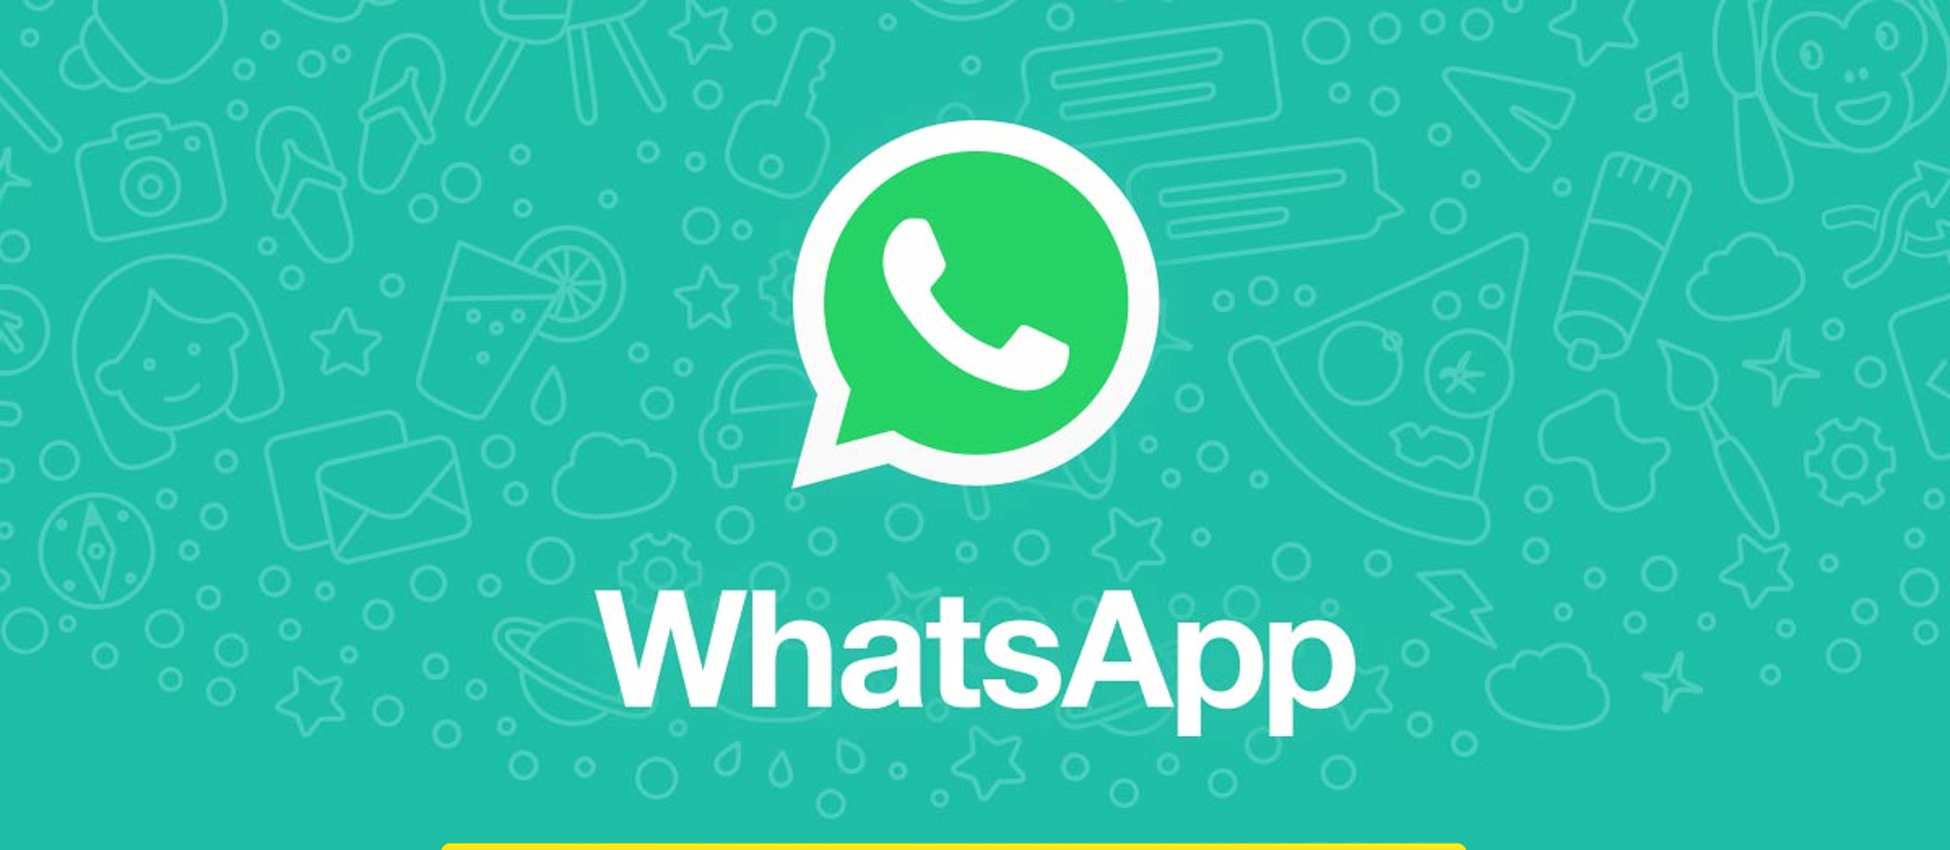 whatsapp business download for pc windows 10